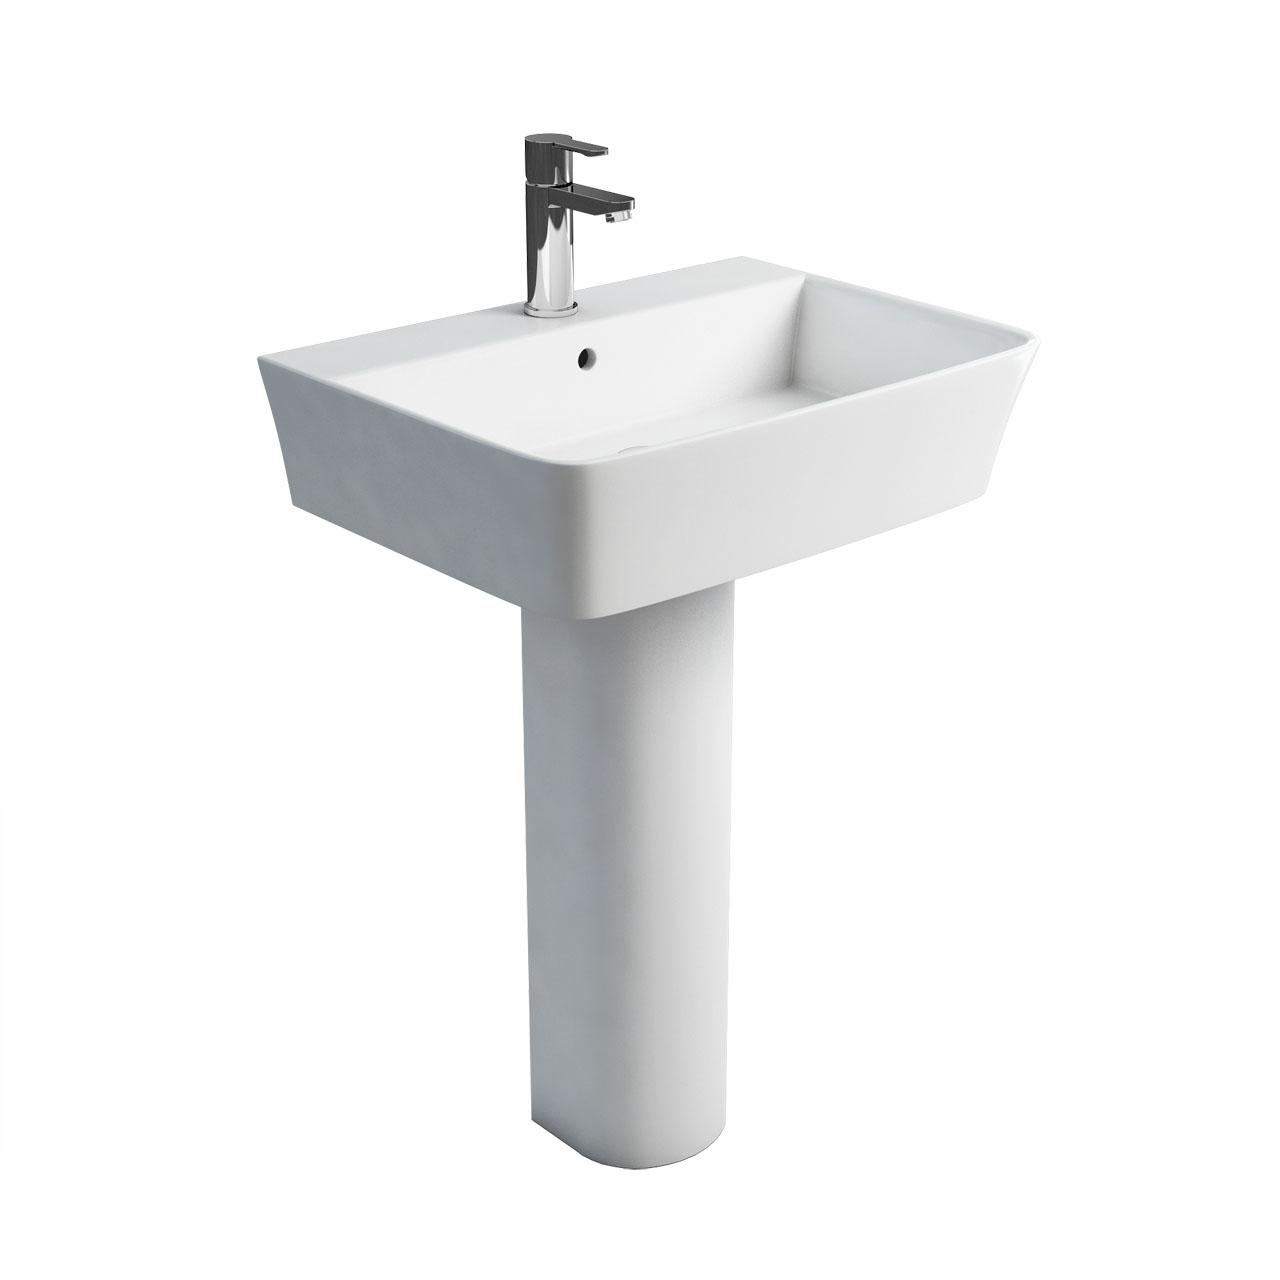 Fine S40 600 basin and round fronted pedestal